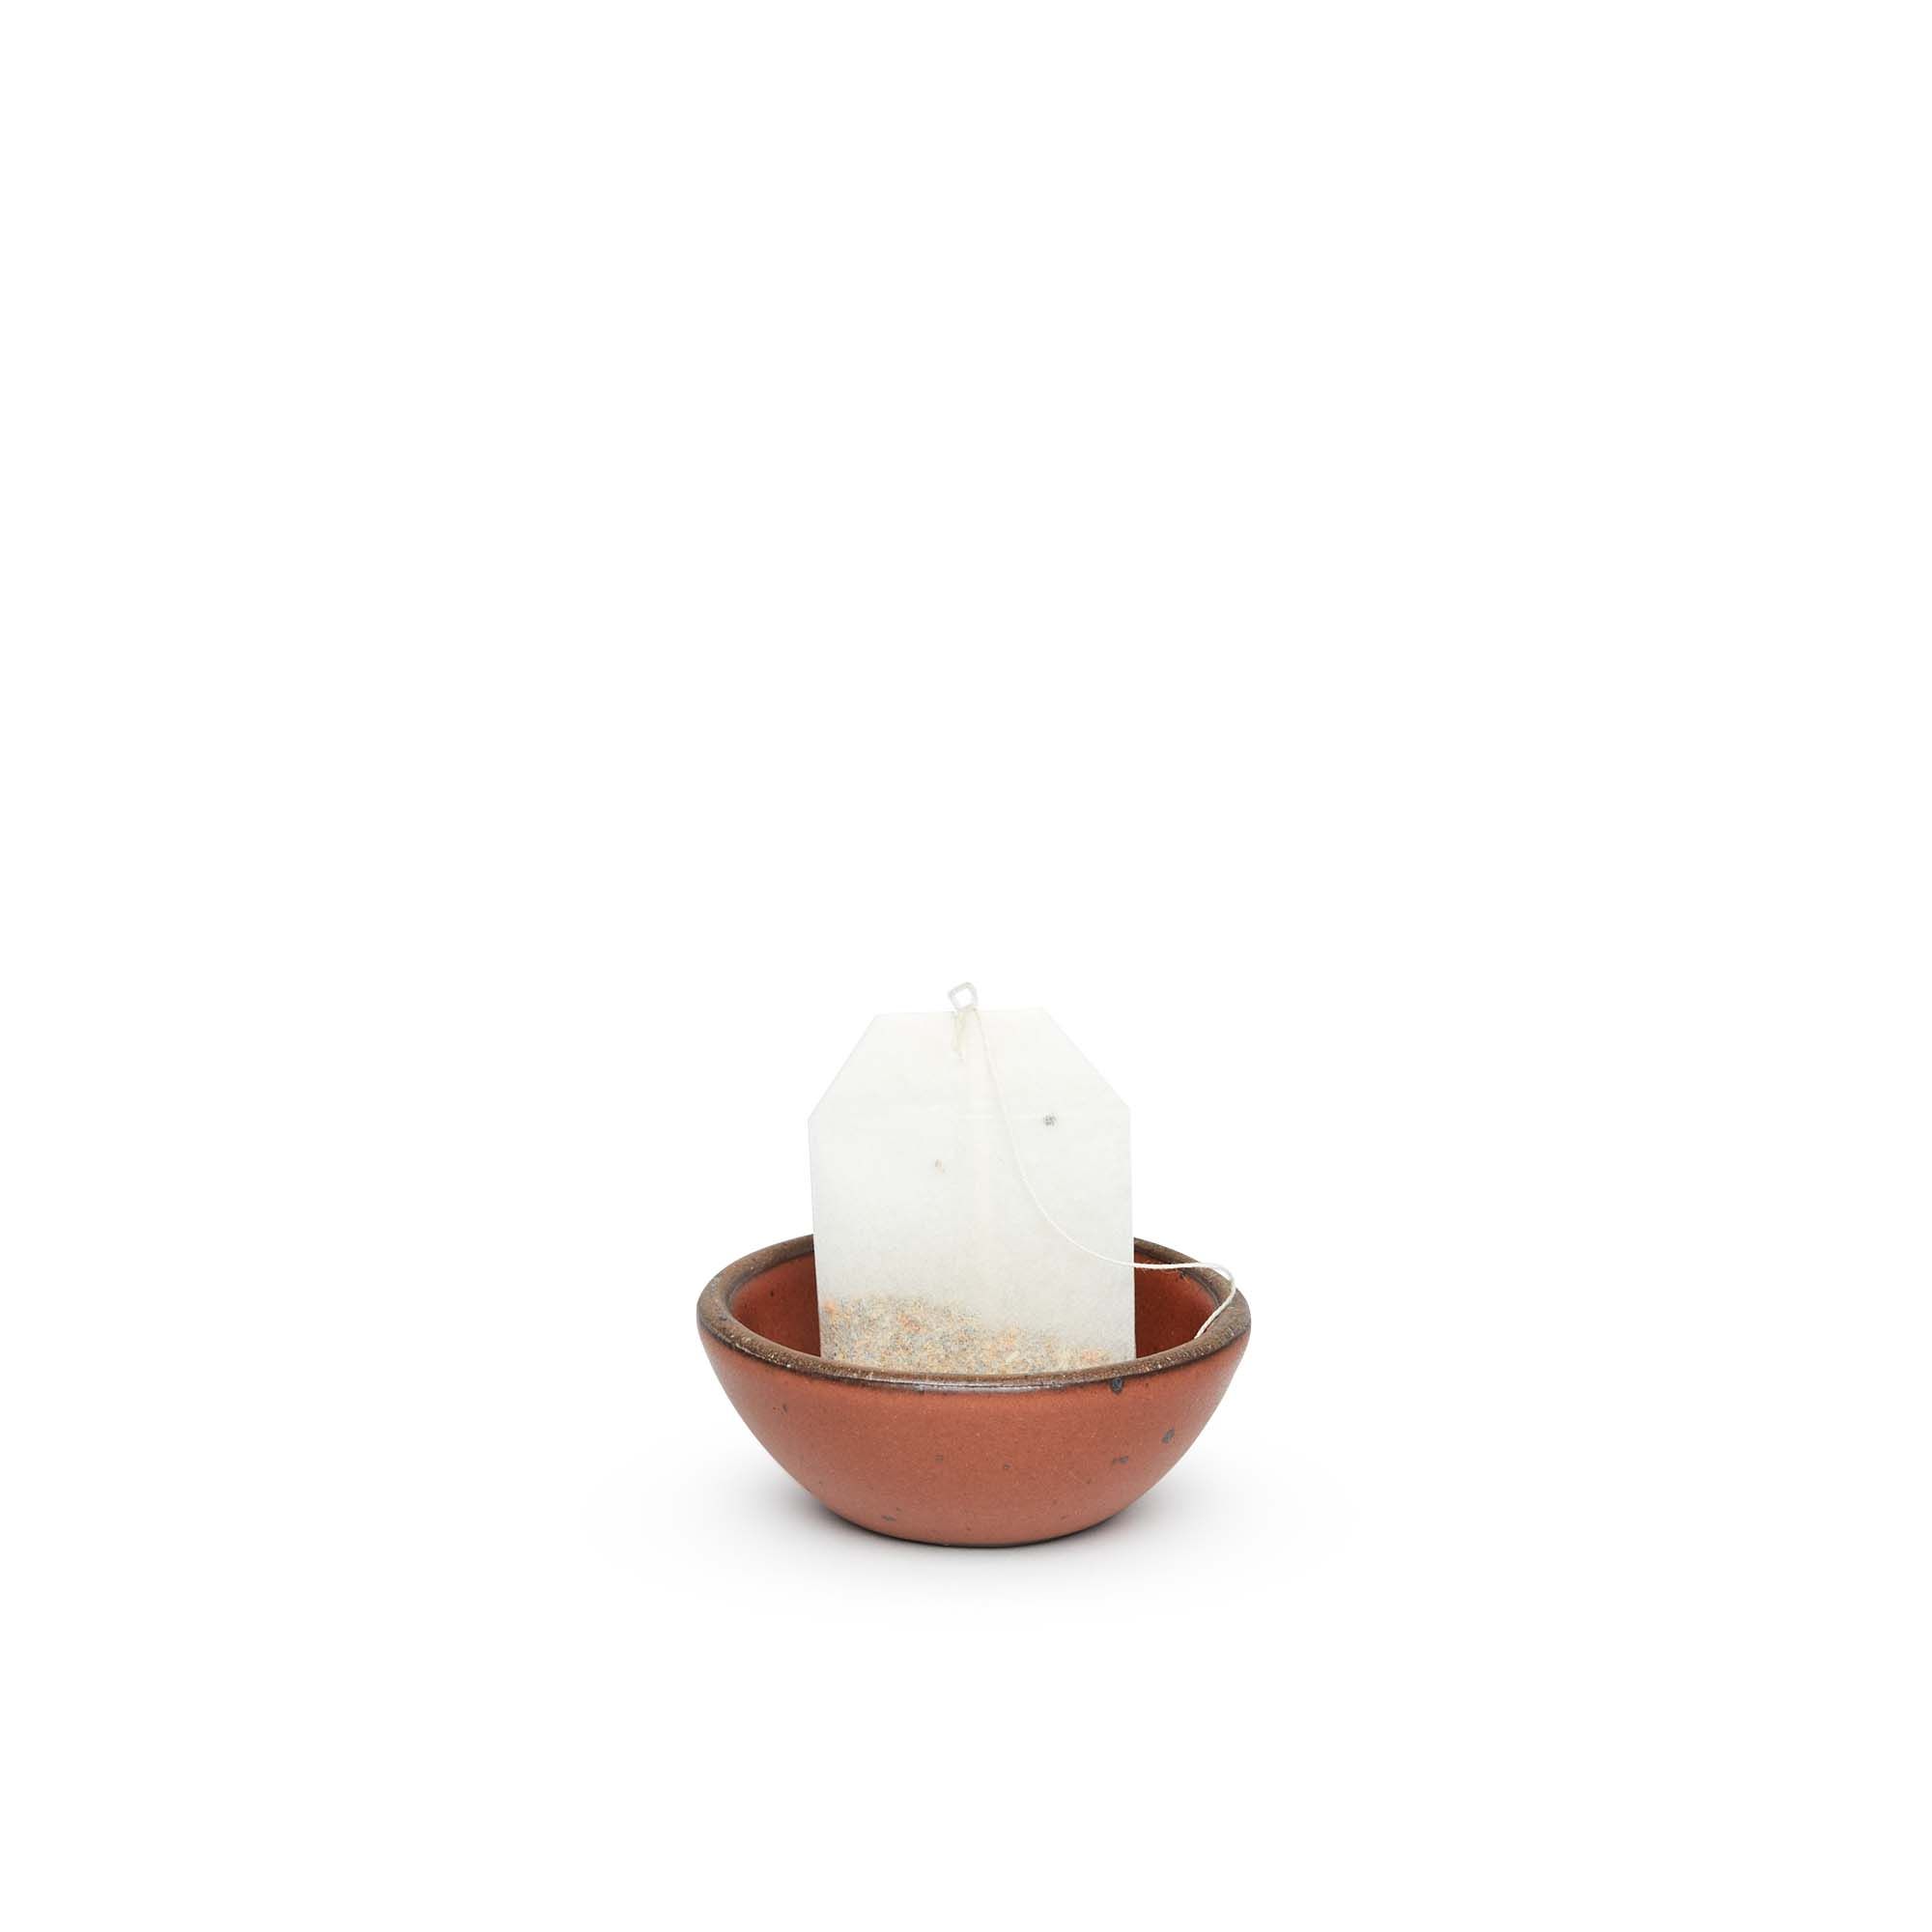 A tiny rounded ceramic bowl in a cool burnt terracotta color featuring iron speckles and an unglazed rim, holding a tea bag